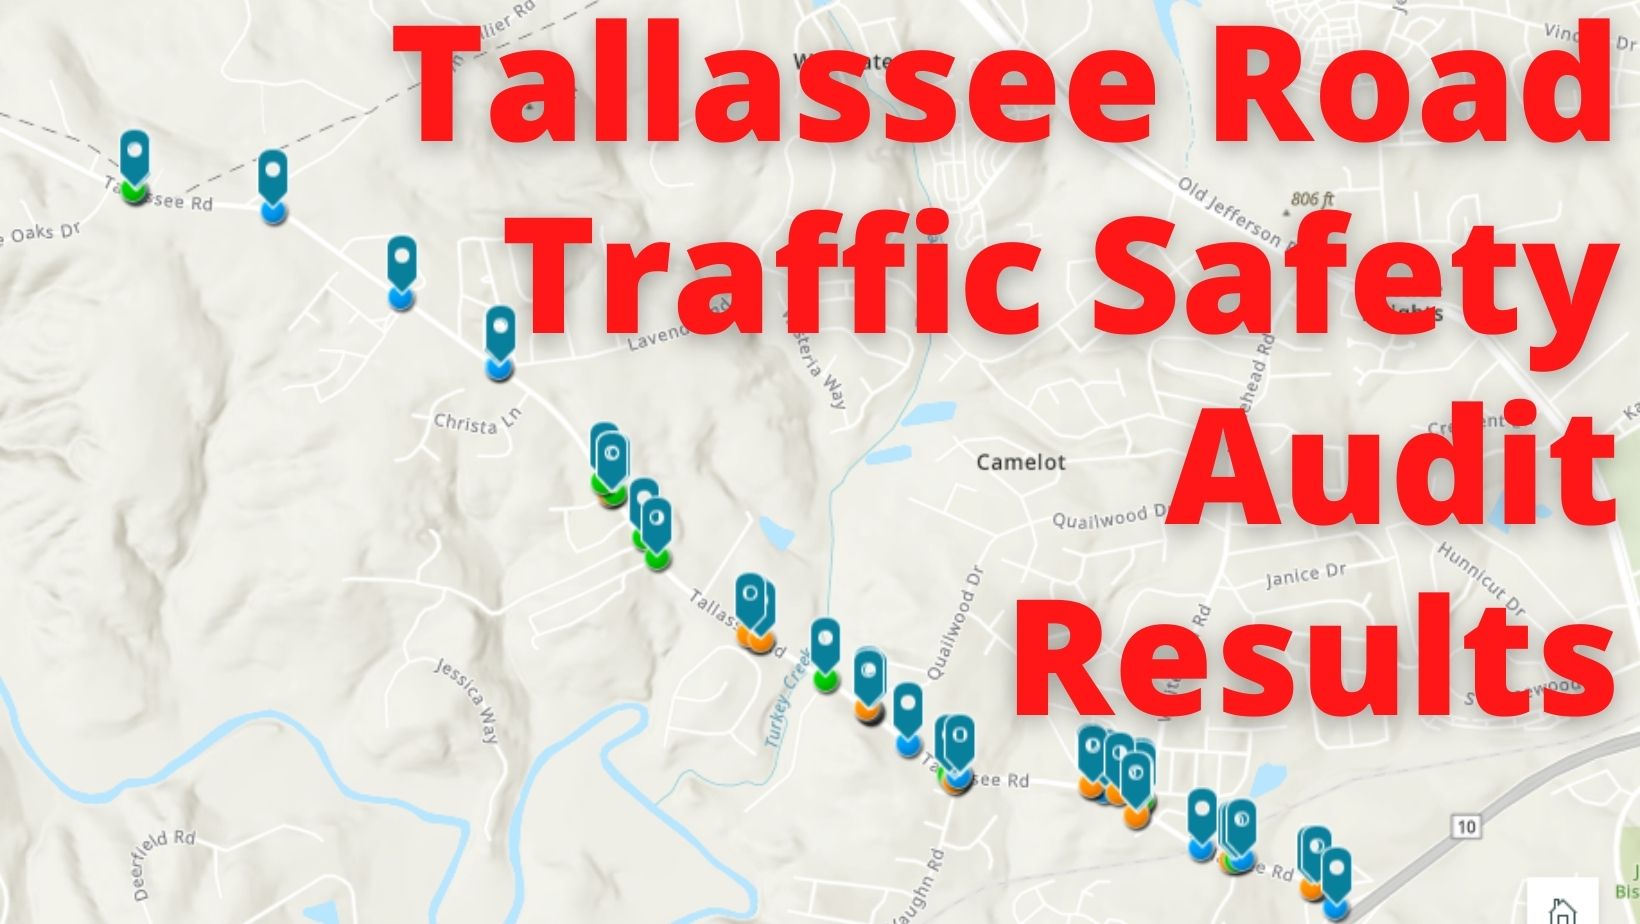 Tallassee Road Traffic Safety Audit Results